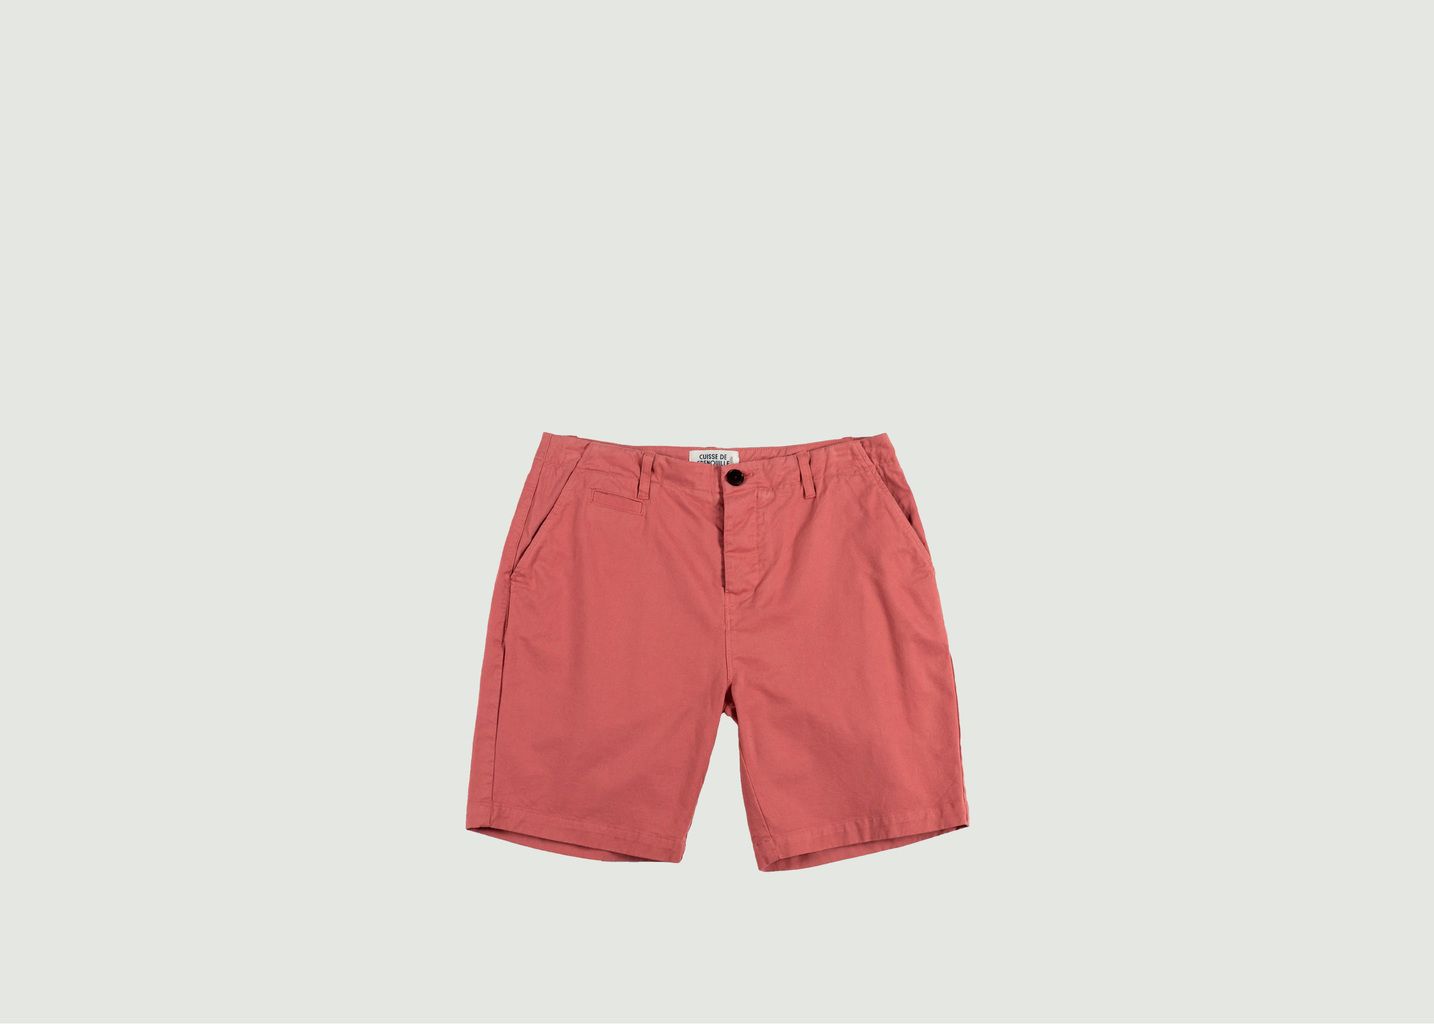 Cuisse de Grenouille 5 Pocket Chino Shorts